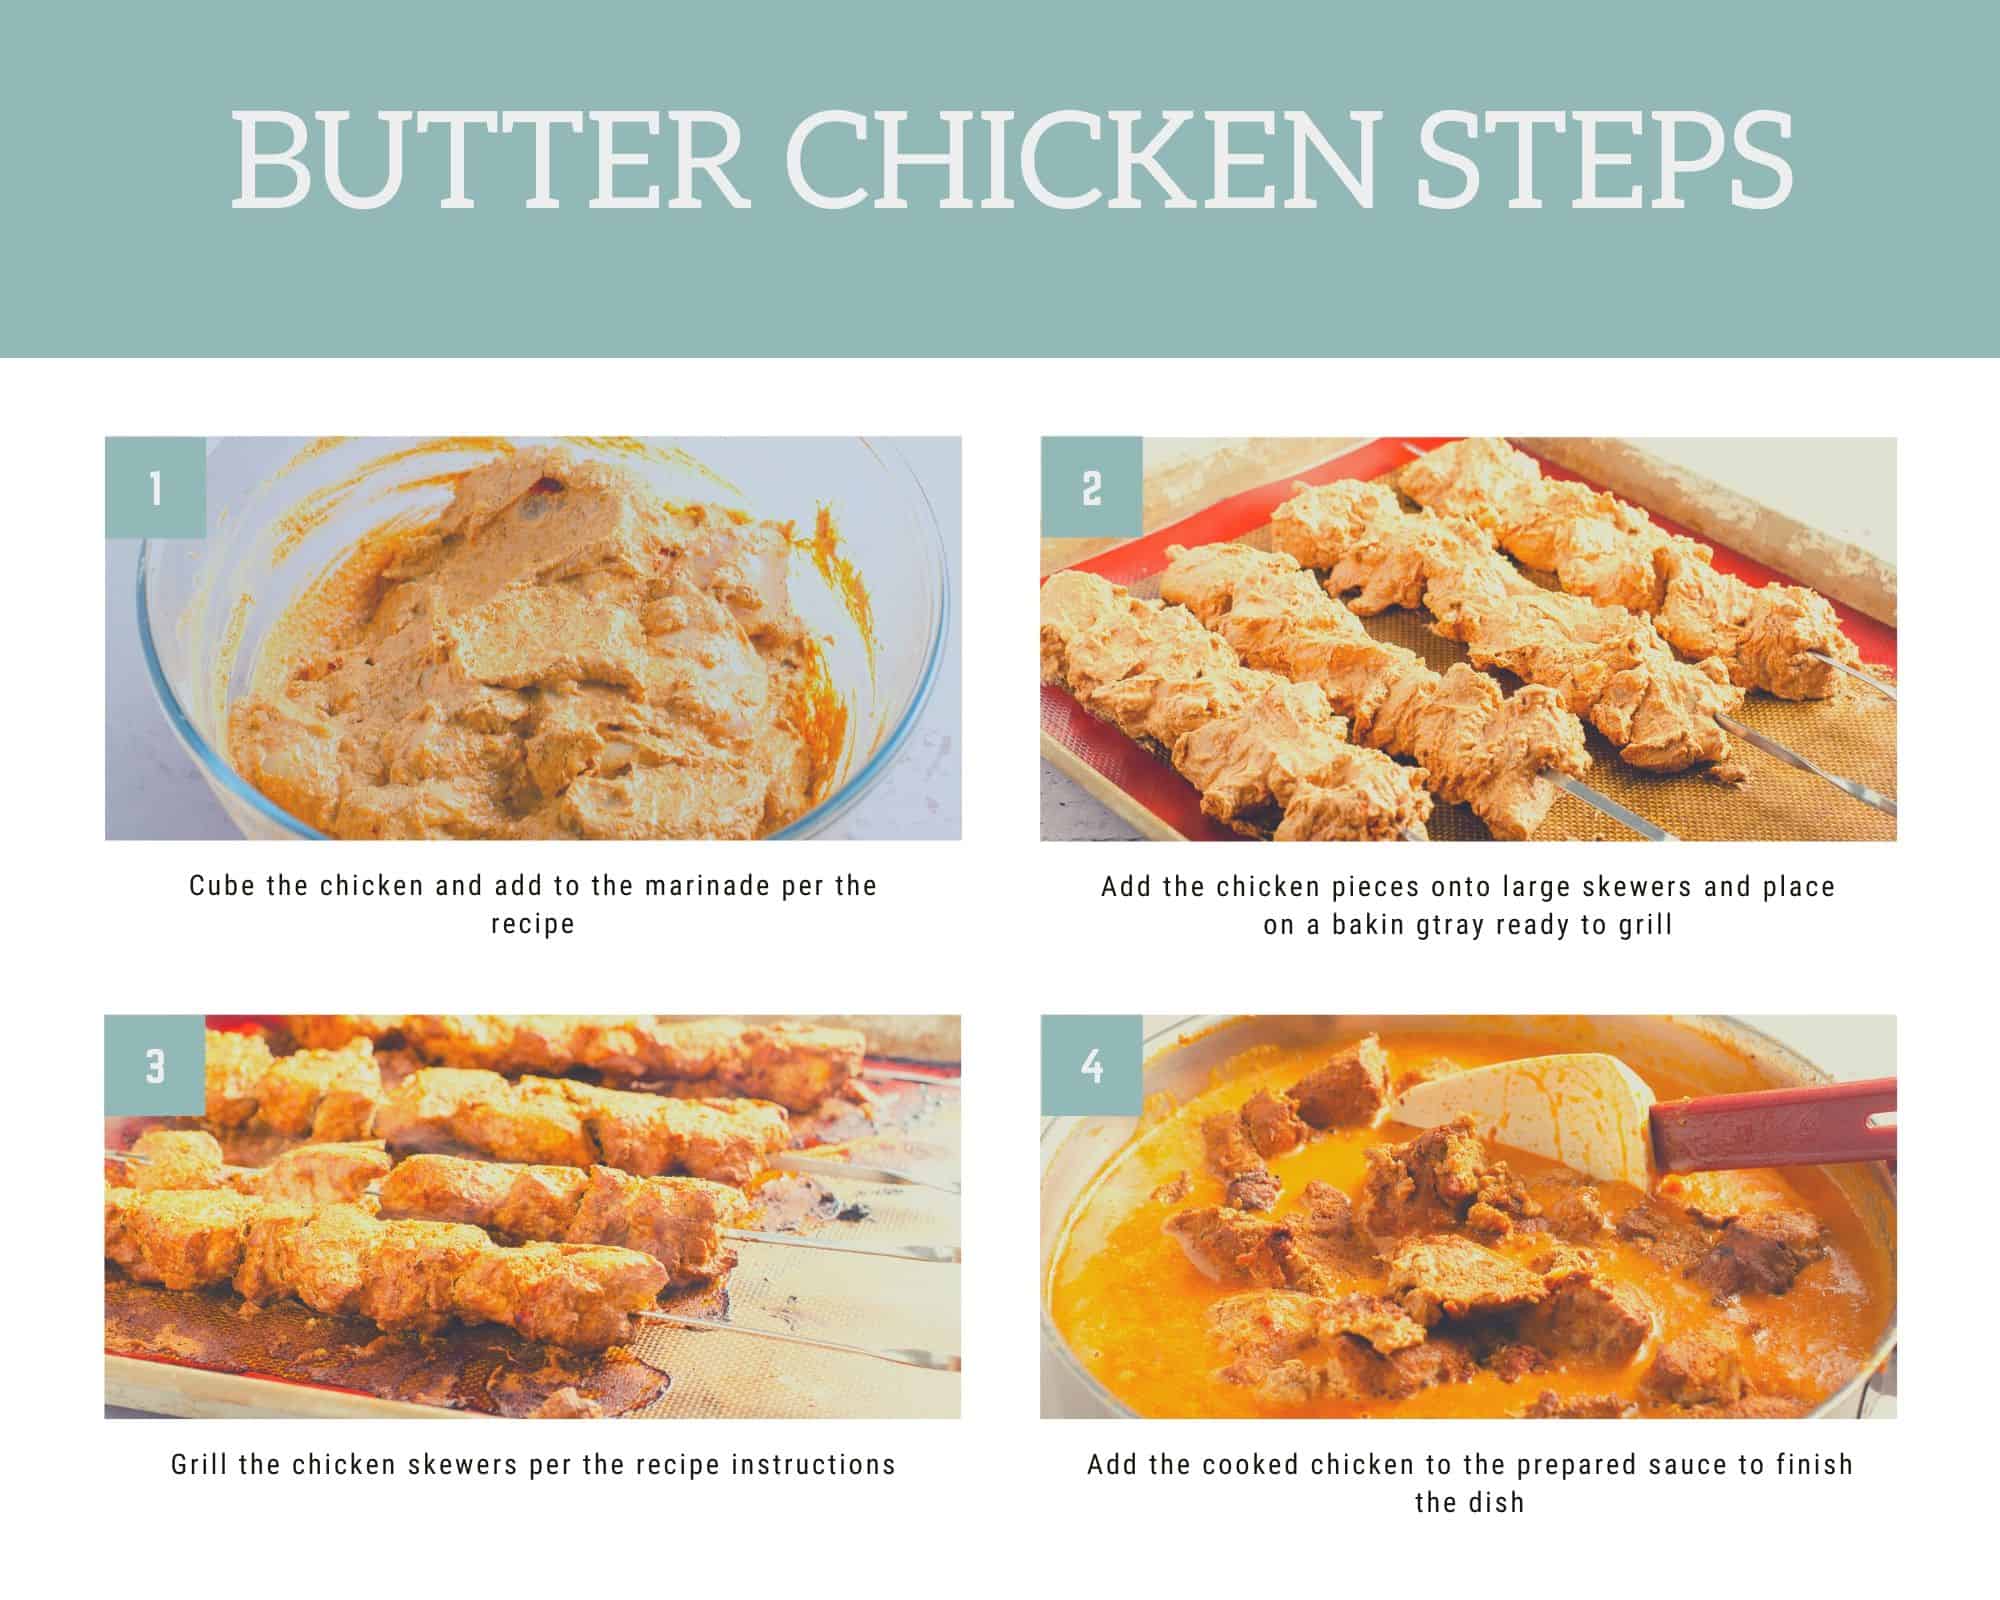 a collage of 4 photos showing the steps of how to make butter chicken from the marinade to the final adding to the sauce.